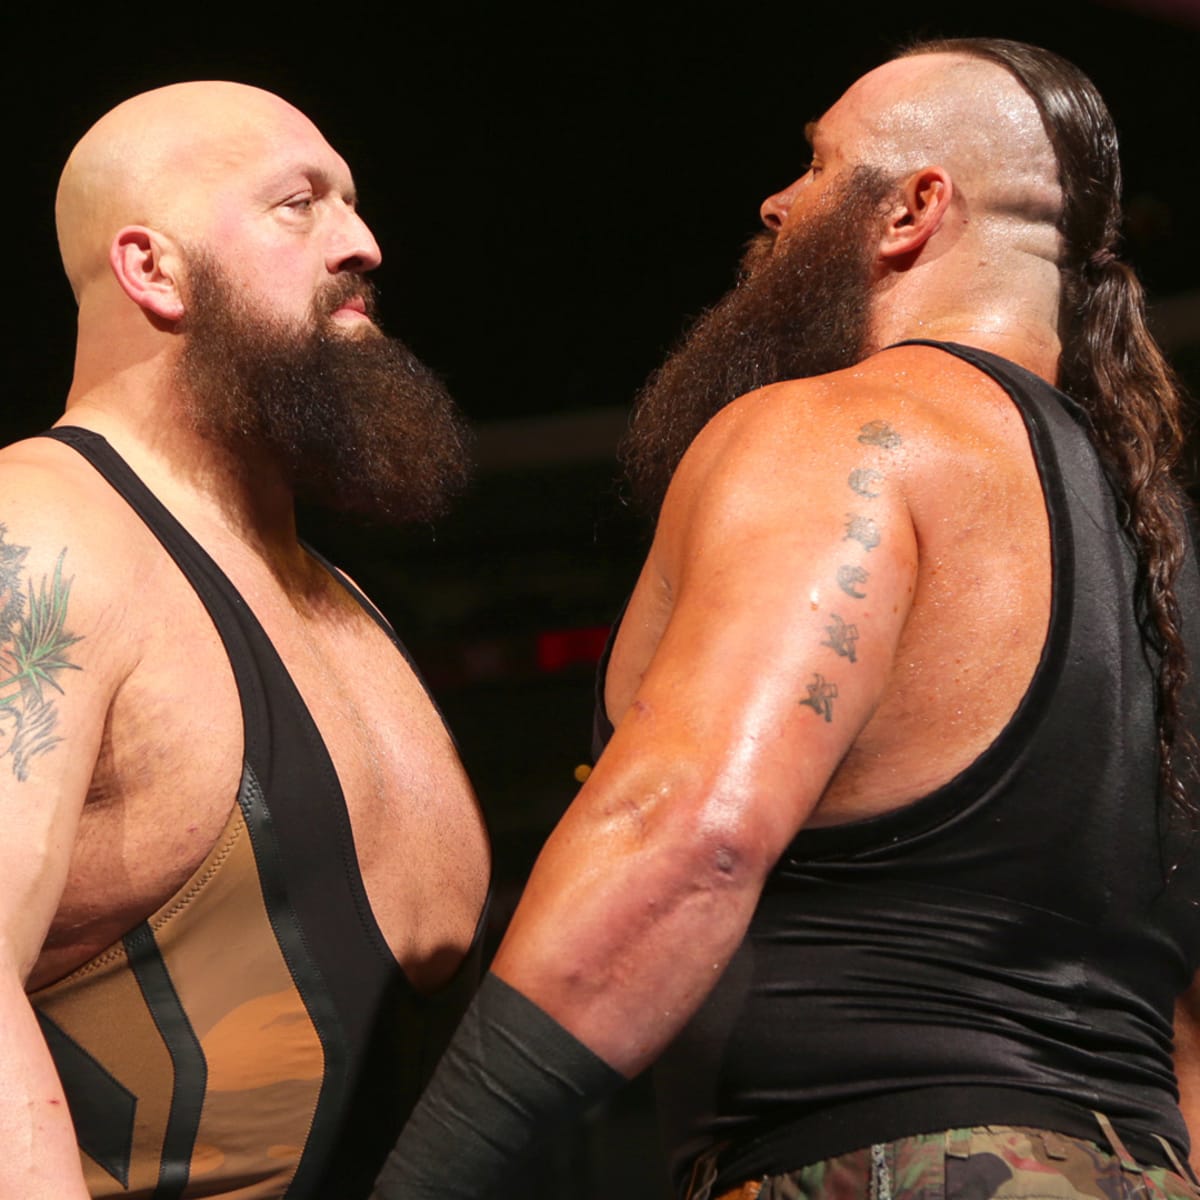 PHOTO: New Picture of Big Show in Excellent Shape - Wrestlezone